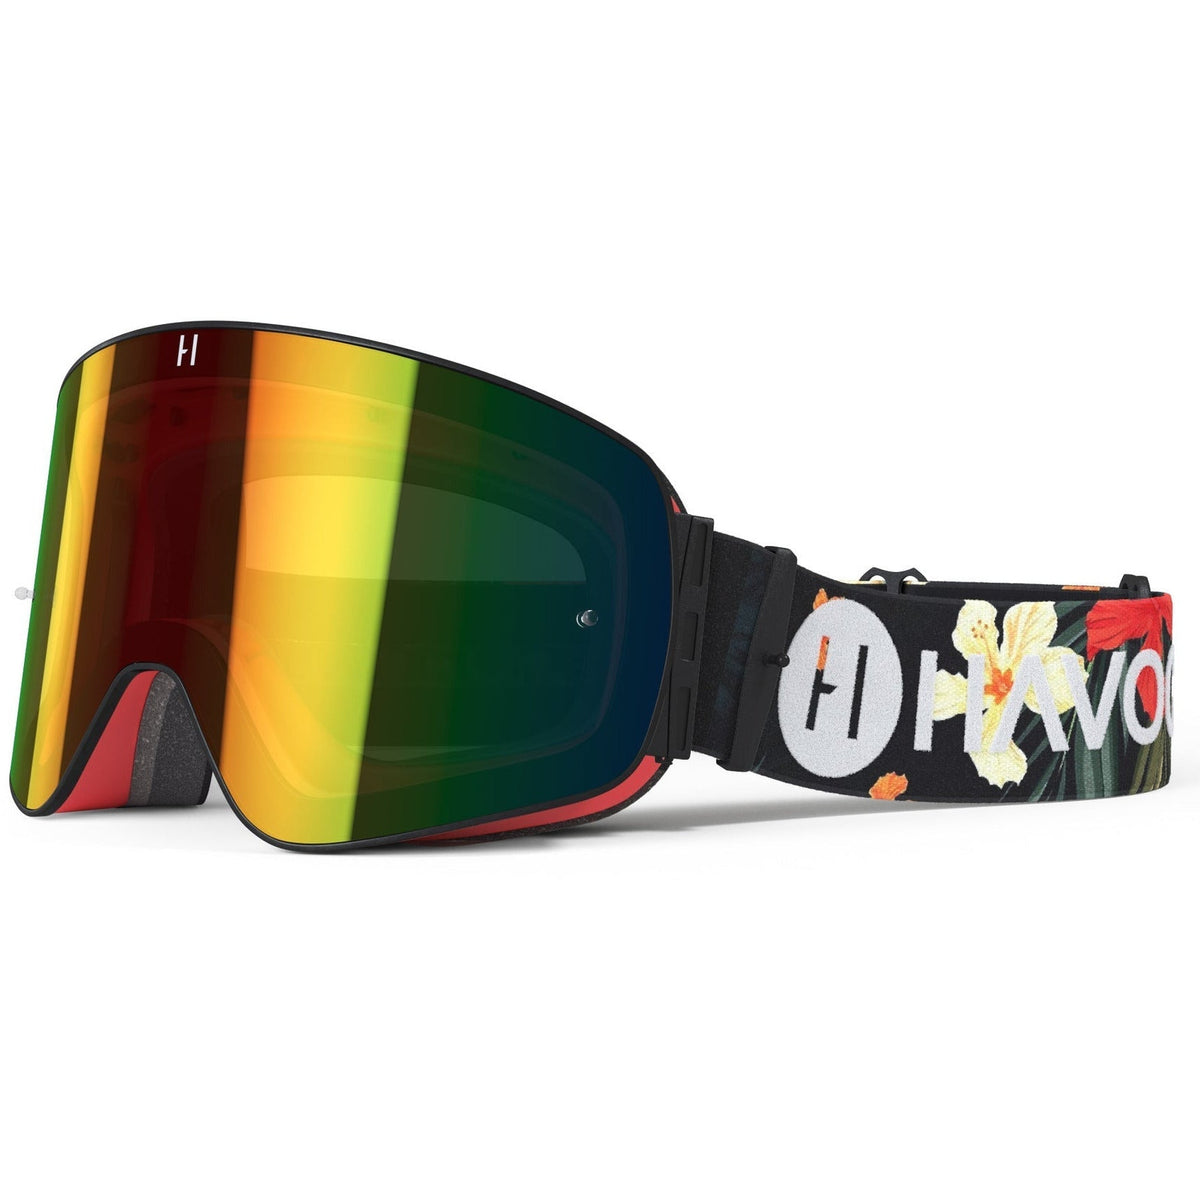 Infinity Goggle (Tropical)